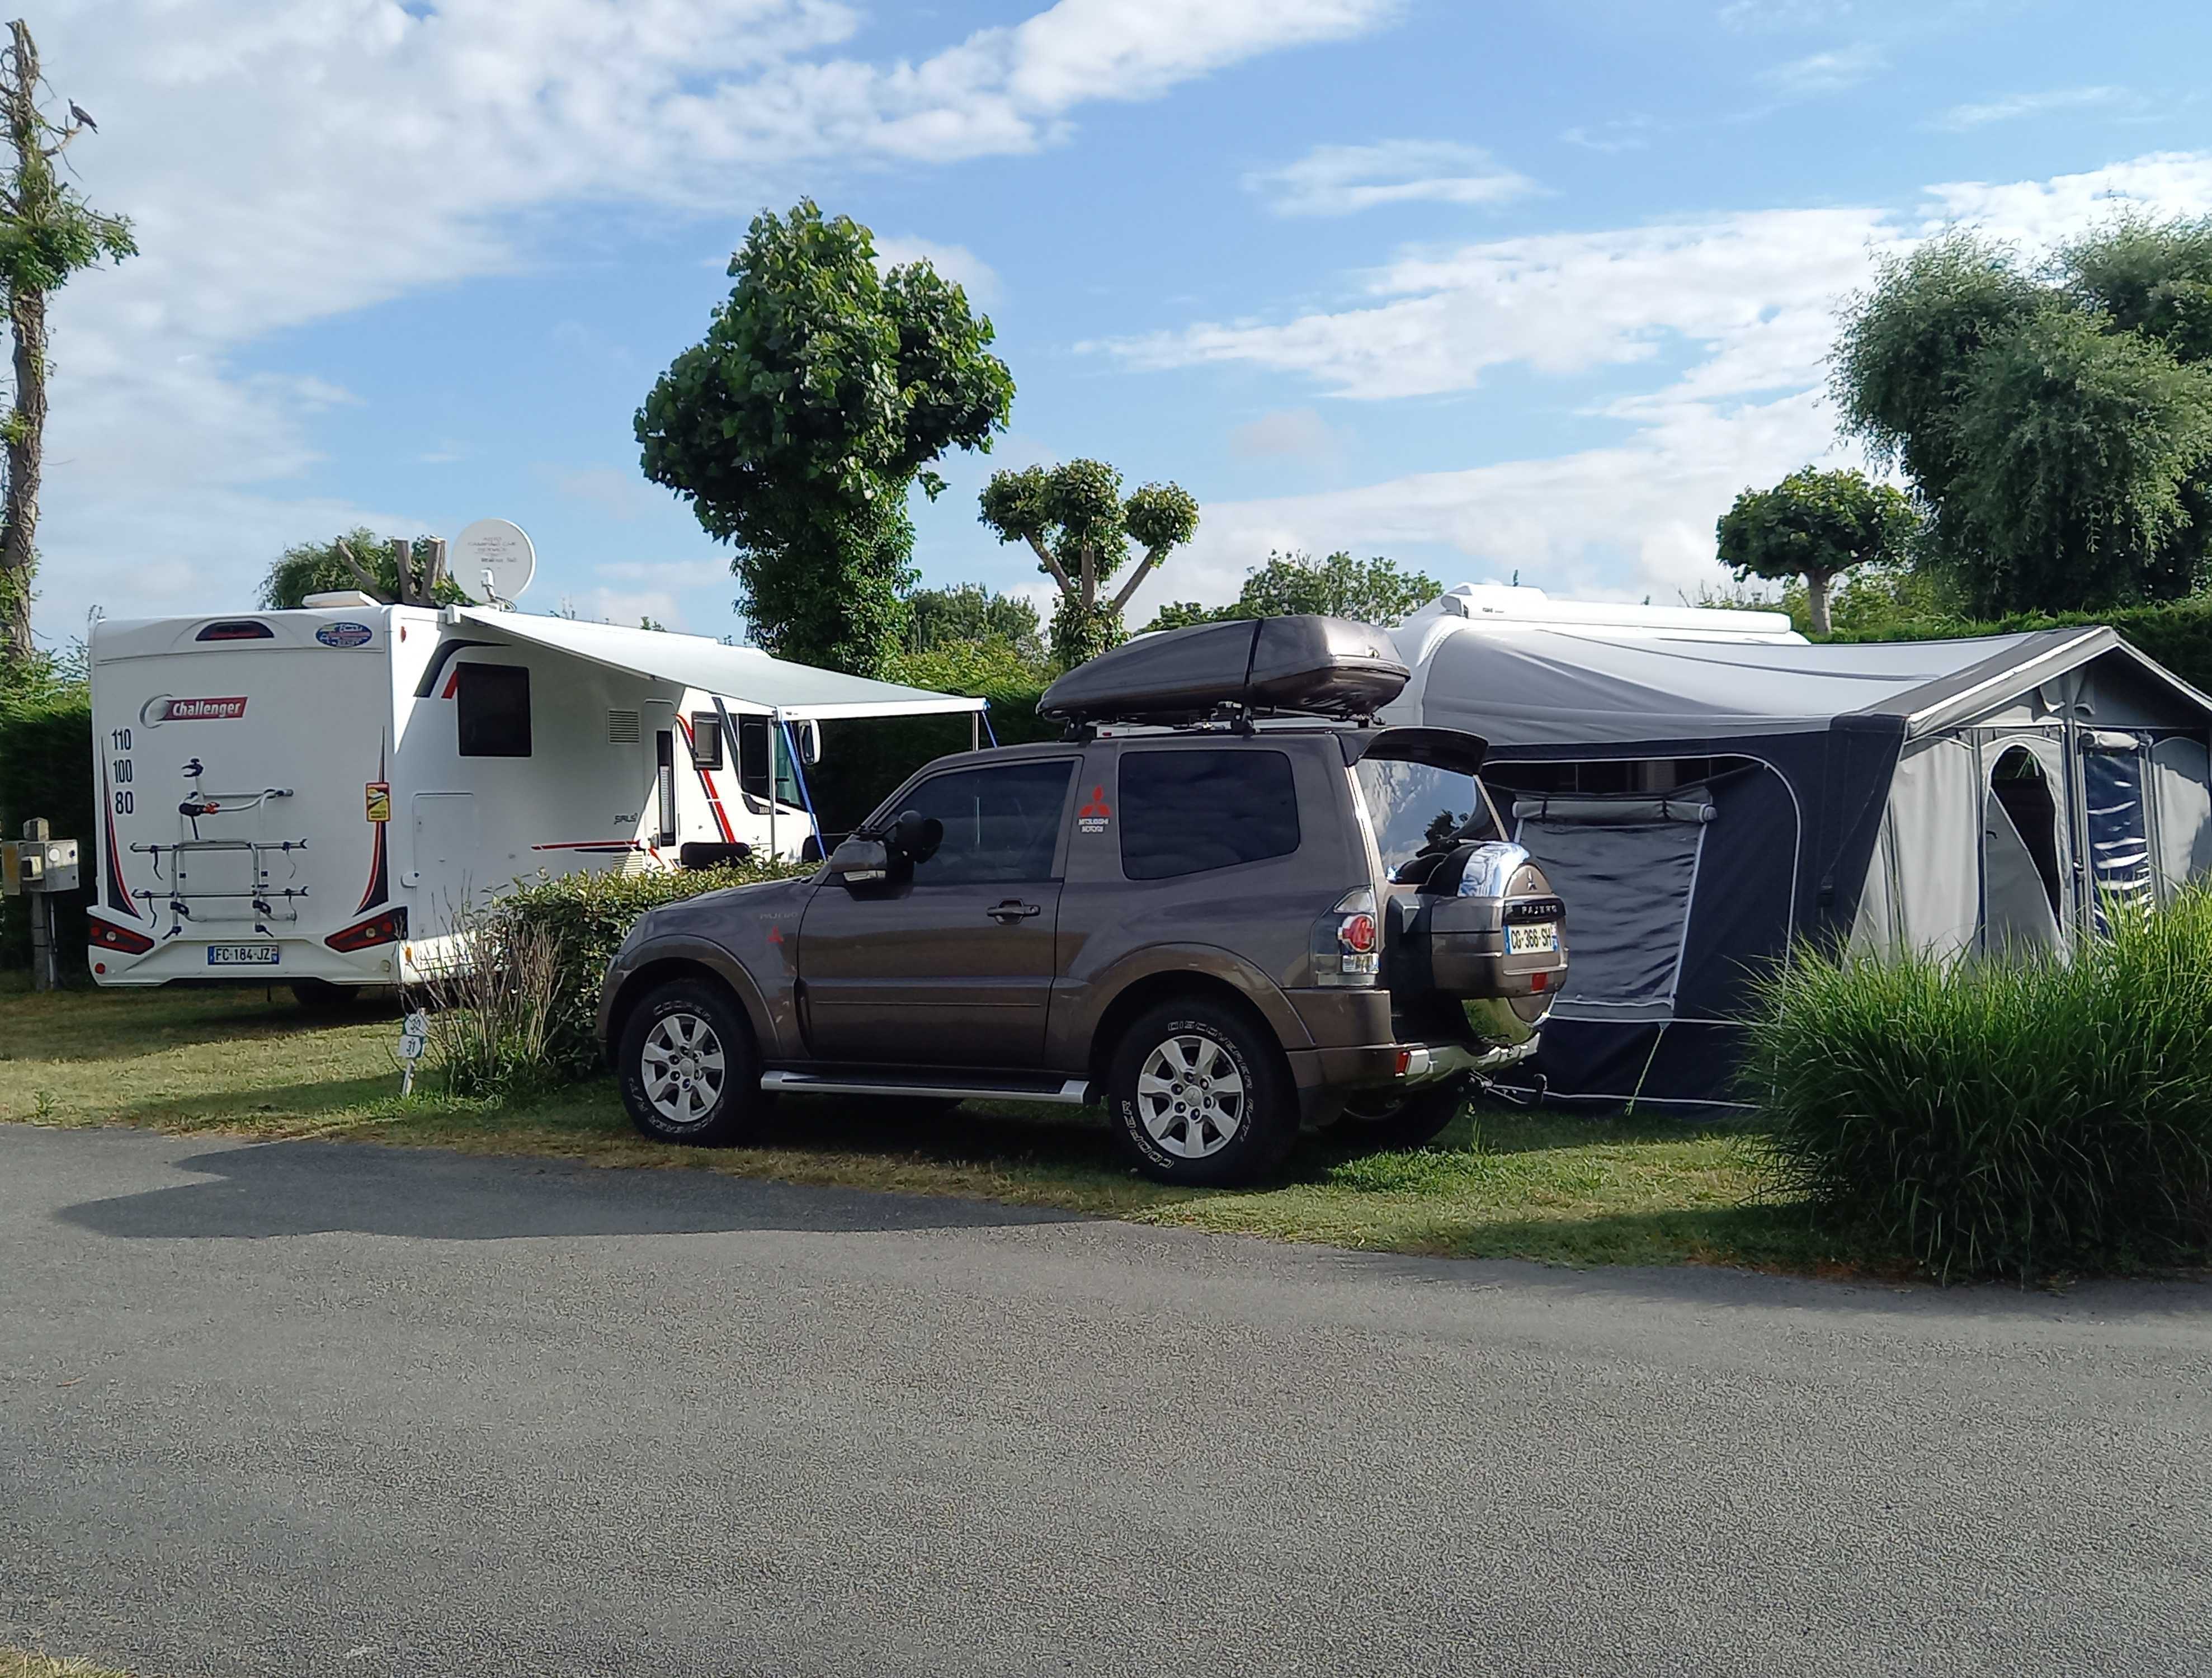 Pitch caravan – 7.50 m  (water, electricity, drain, 2 people and 1 vehicle) 1/2 Ppl. 1/2 Ppl.